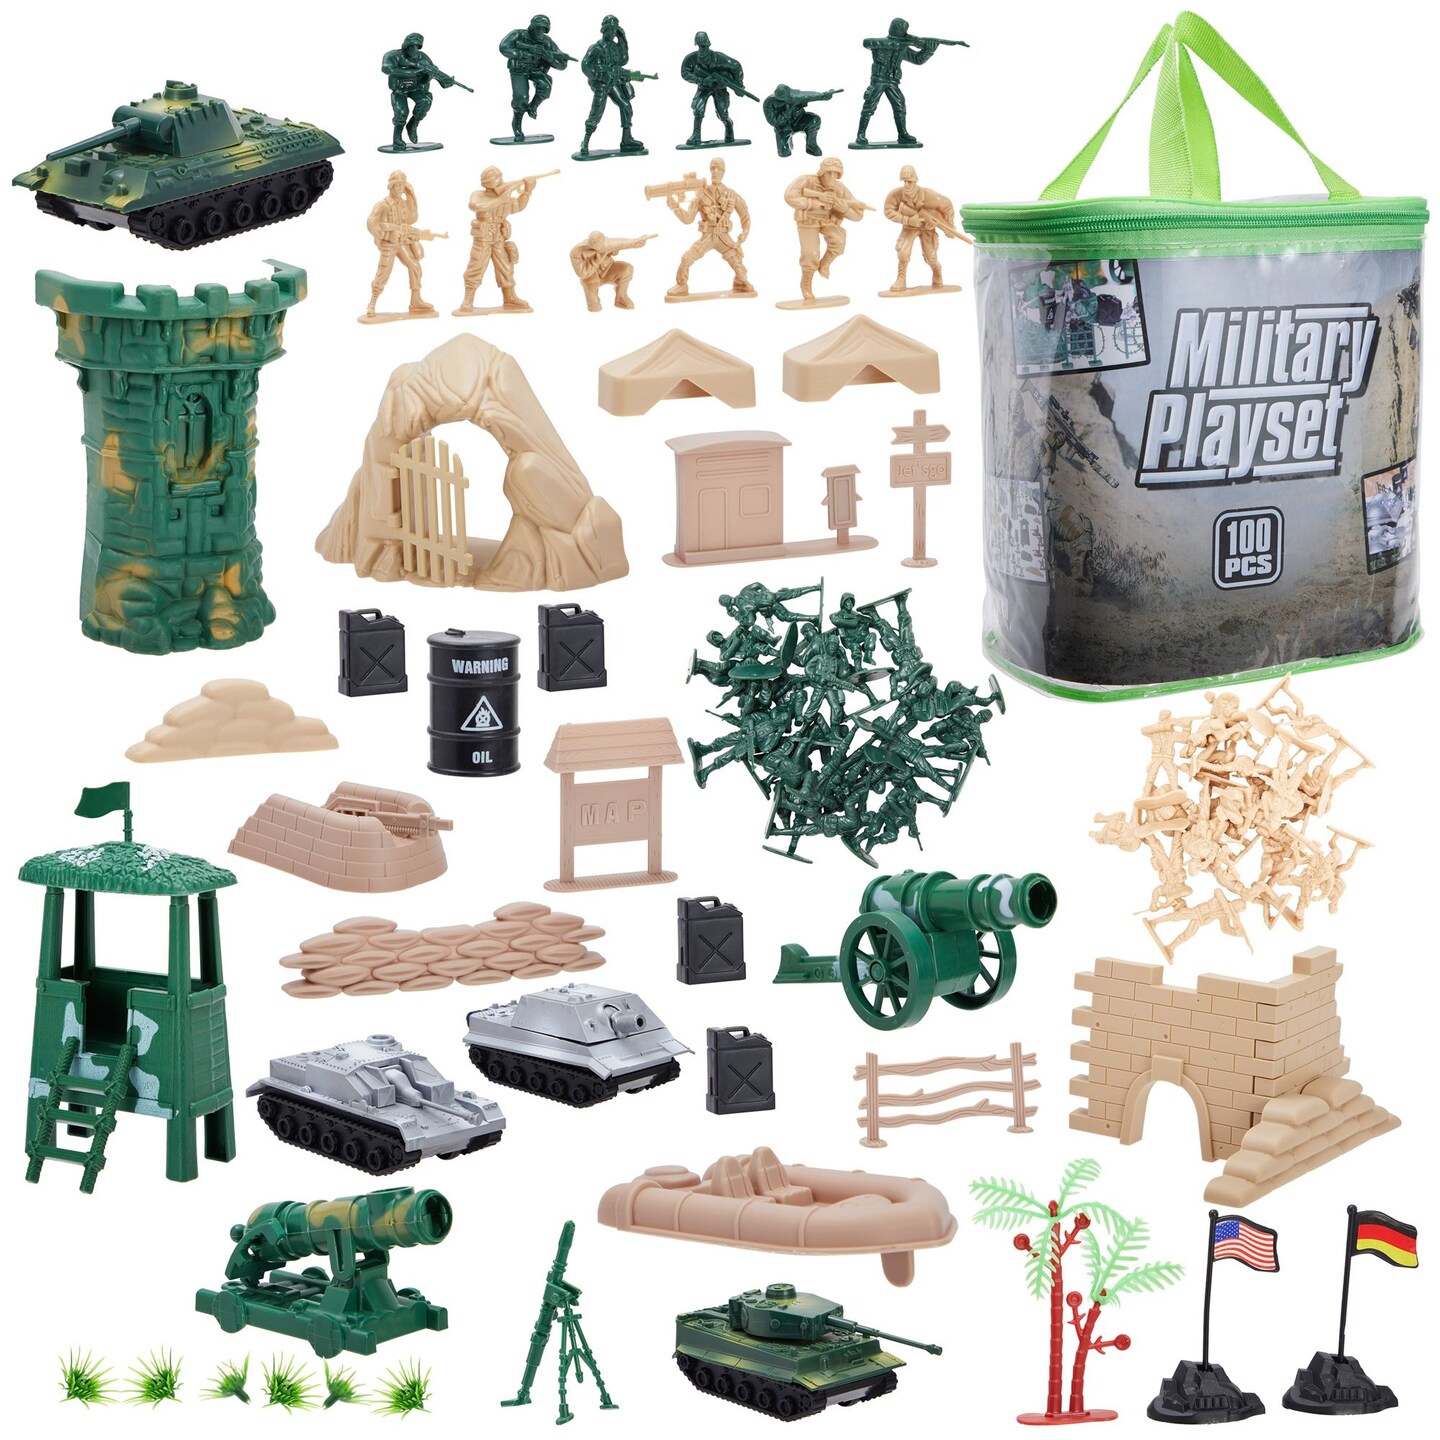 100-Piece Army Men Toy Soldiers Playset for Boys – Small Plastic